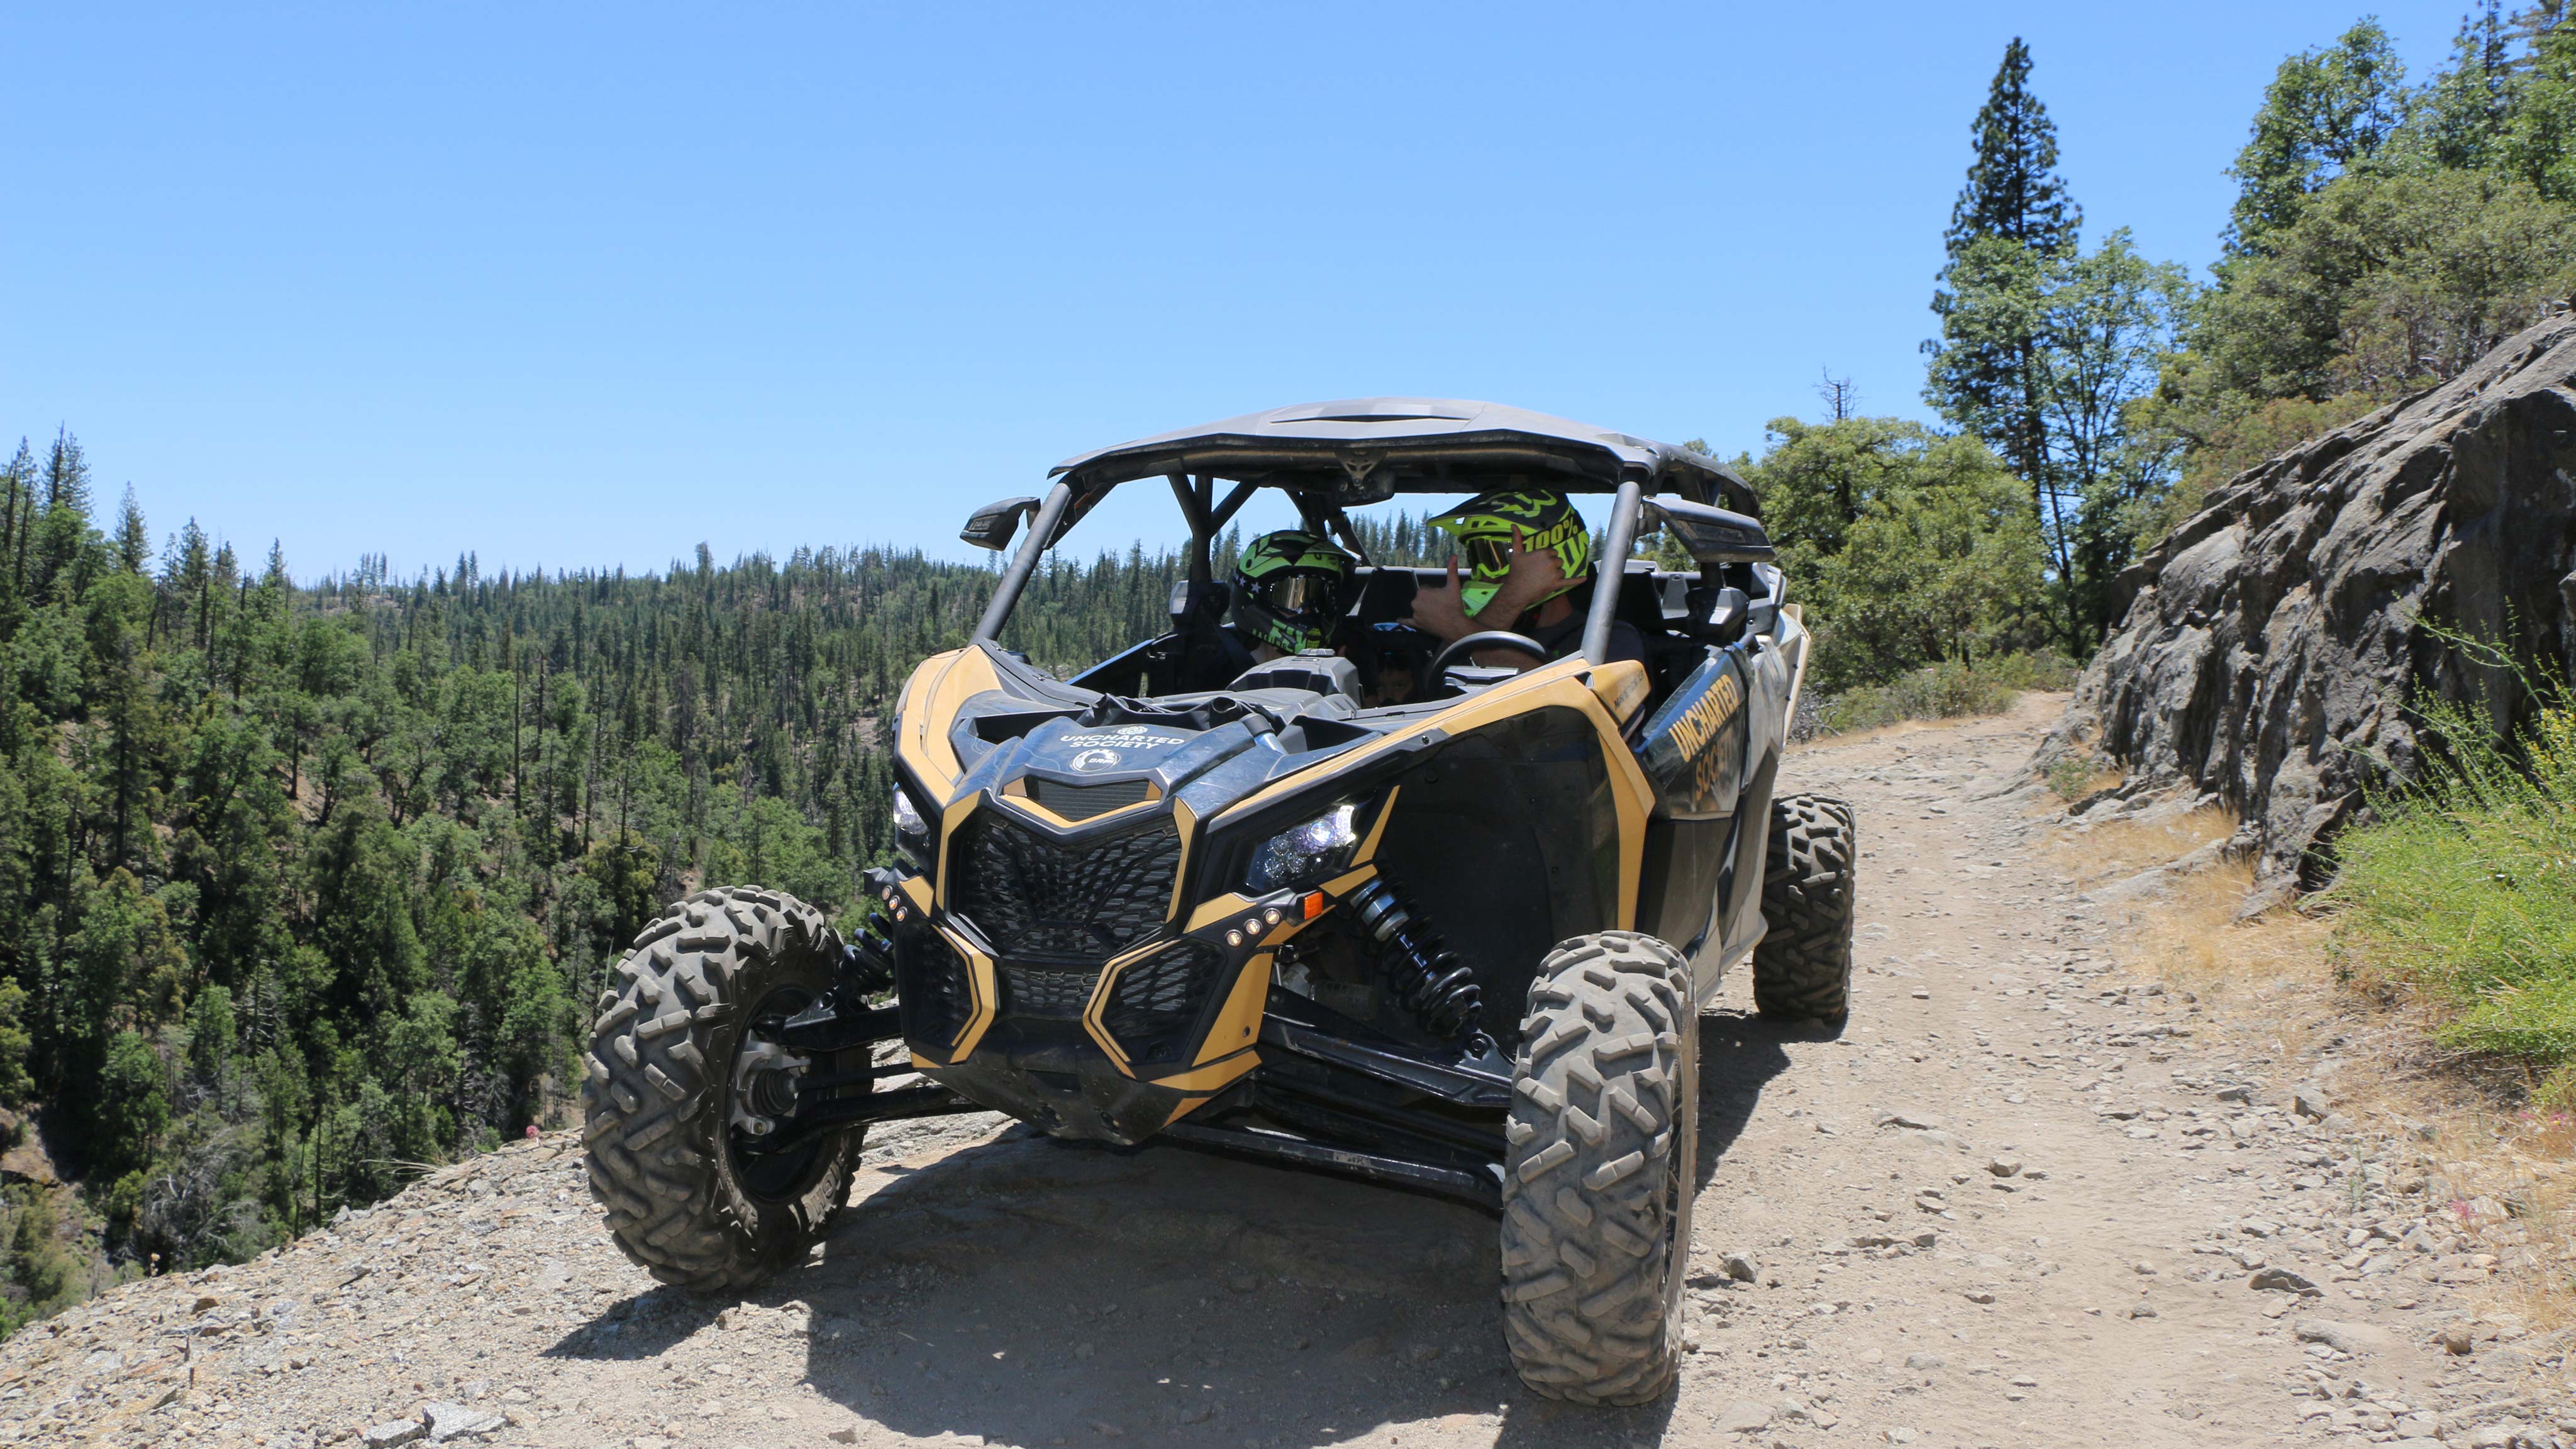 A father and son in a Can-Am SxS vehicle